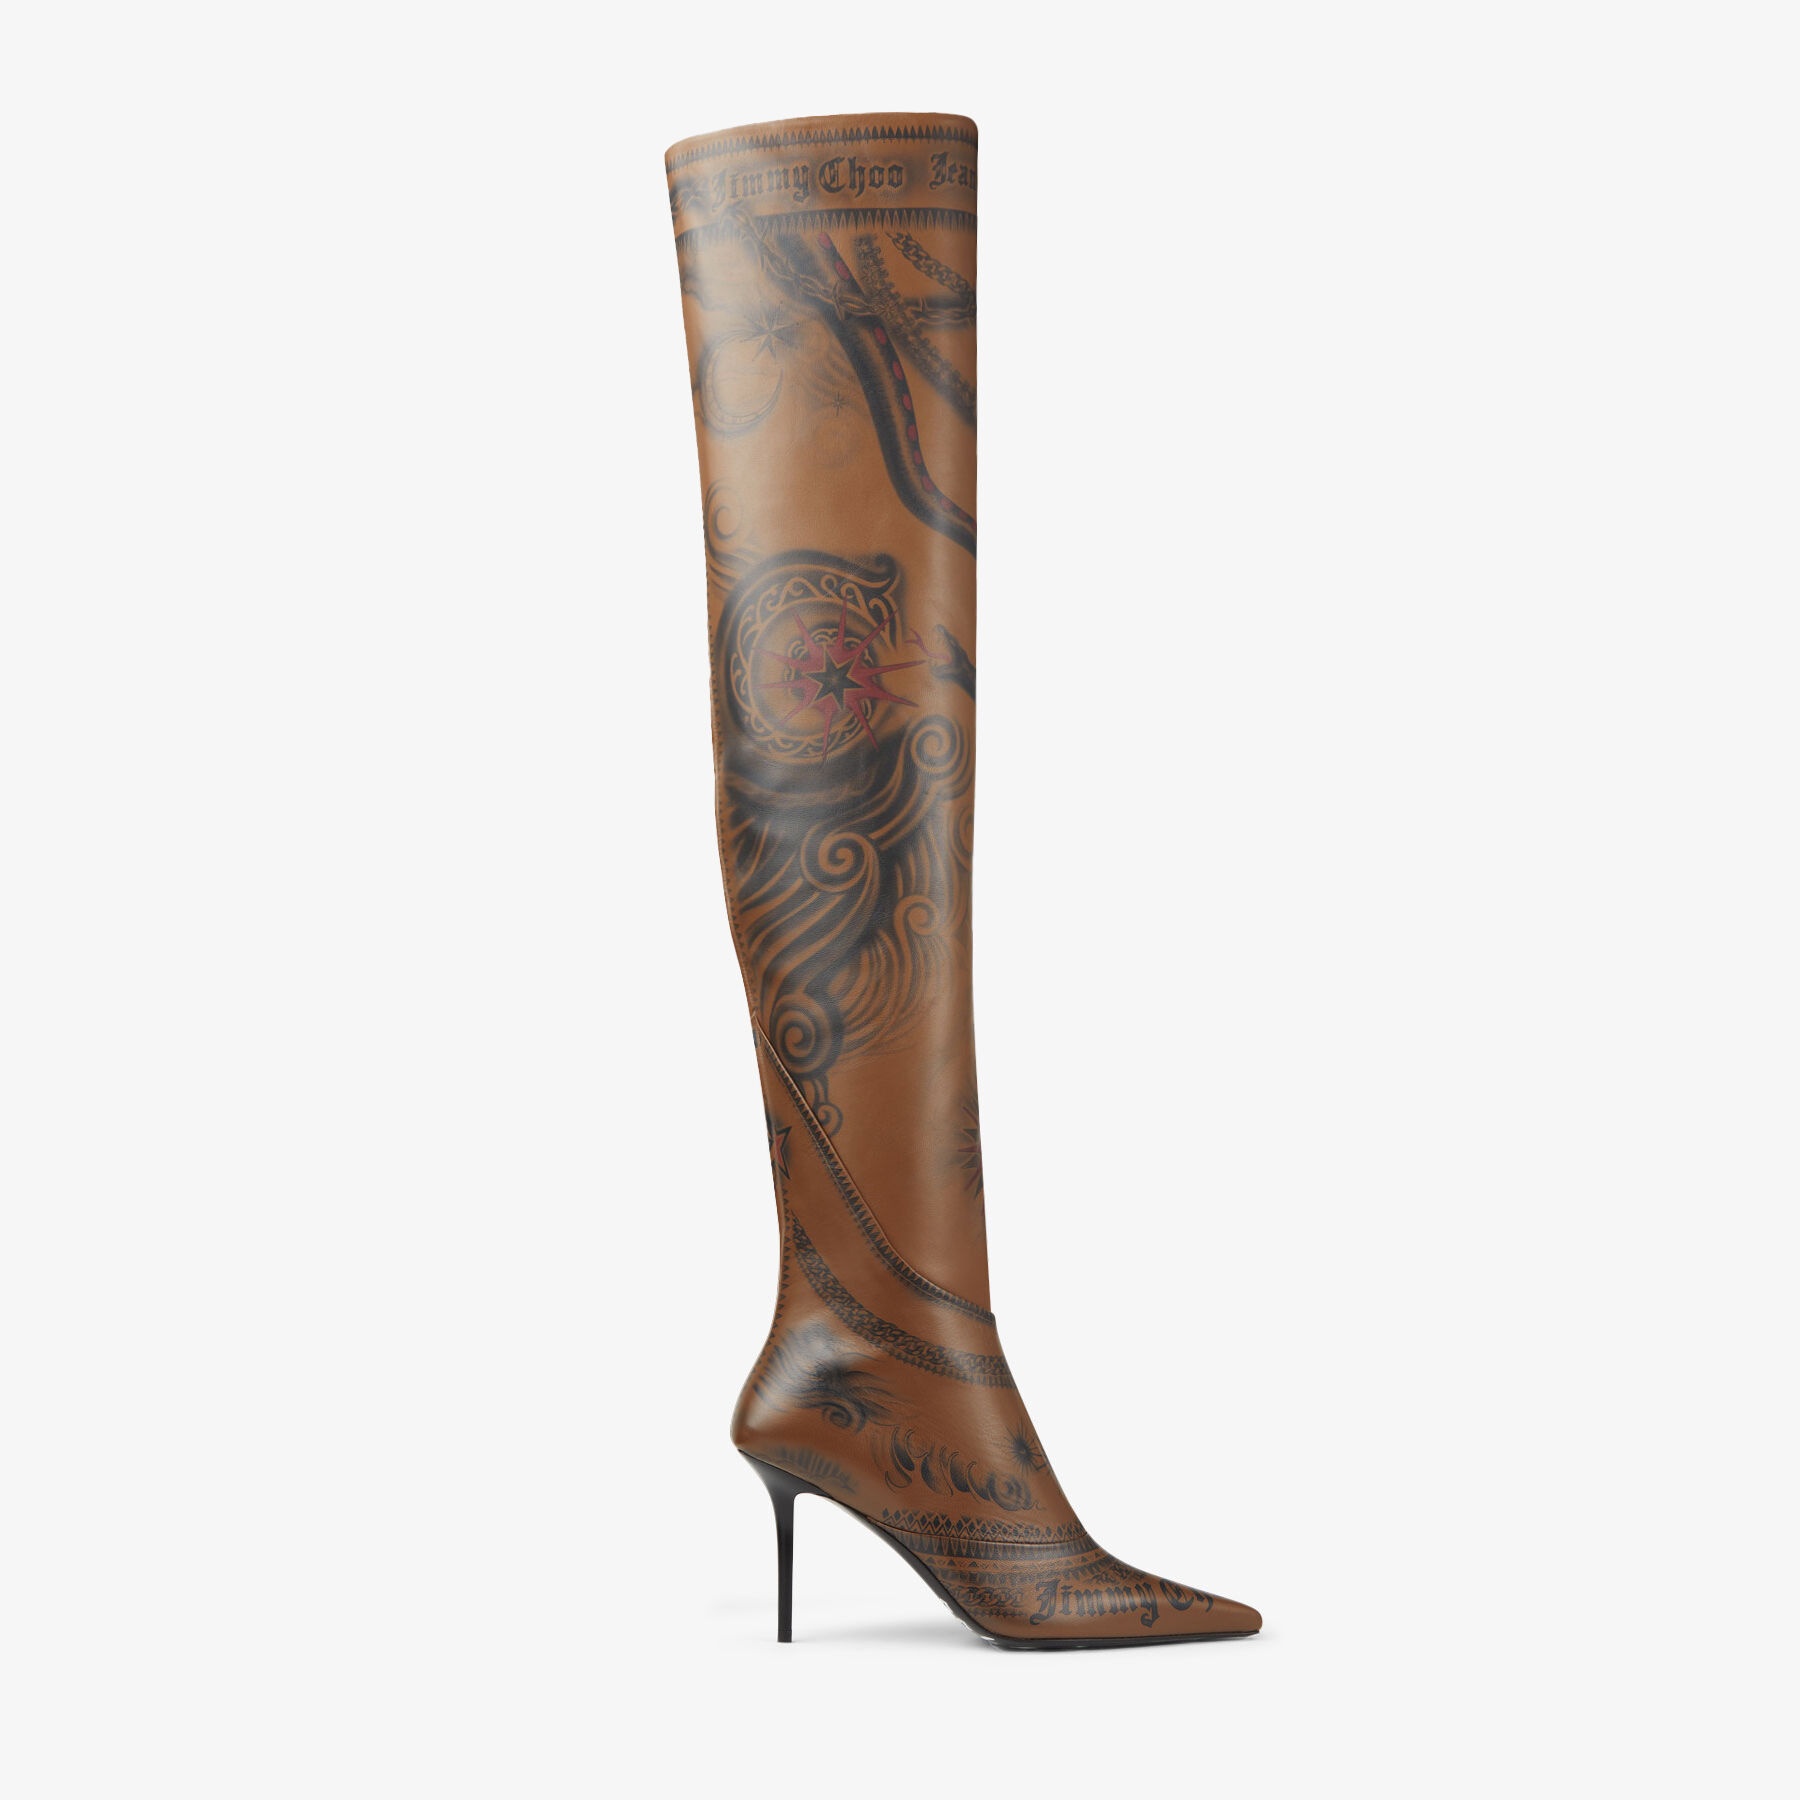 Jimmy Choo / Jean Paul Gaultier Over The Knee Boot 90
Clove Tattoo Printed Leather Over-The-Knee Boo - 1